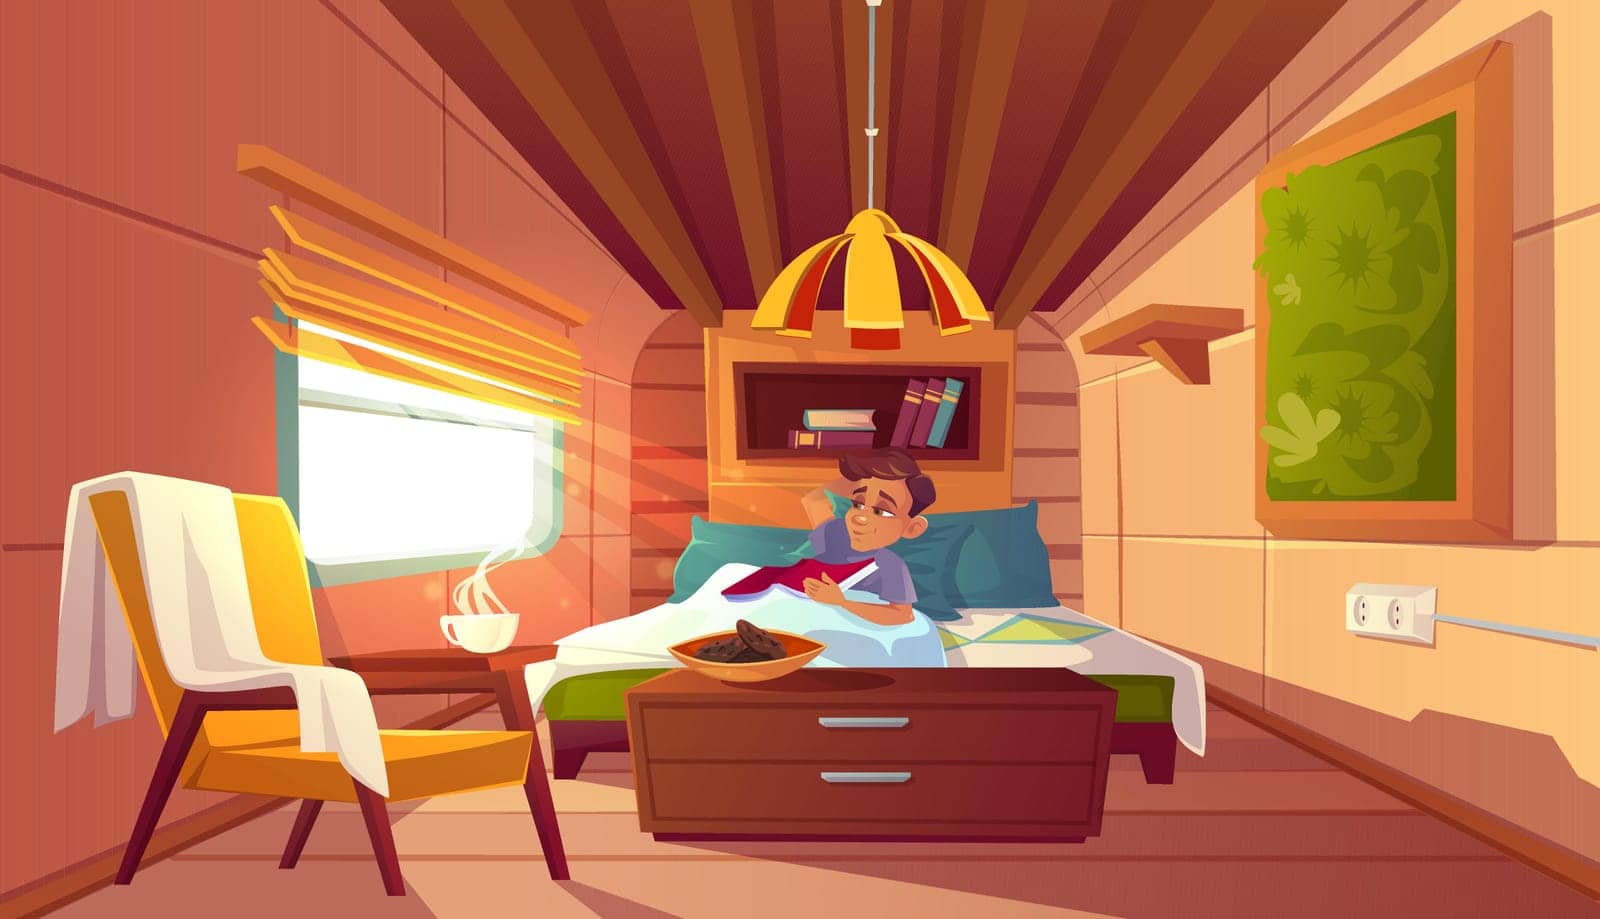 Man lying in bed in camper at morning. Vector cartoon illustration of cozy interior of bedroom in trailer car with happy character, books, armchair, coffee and cookies on nightstand